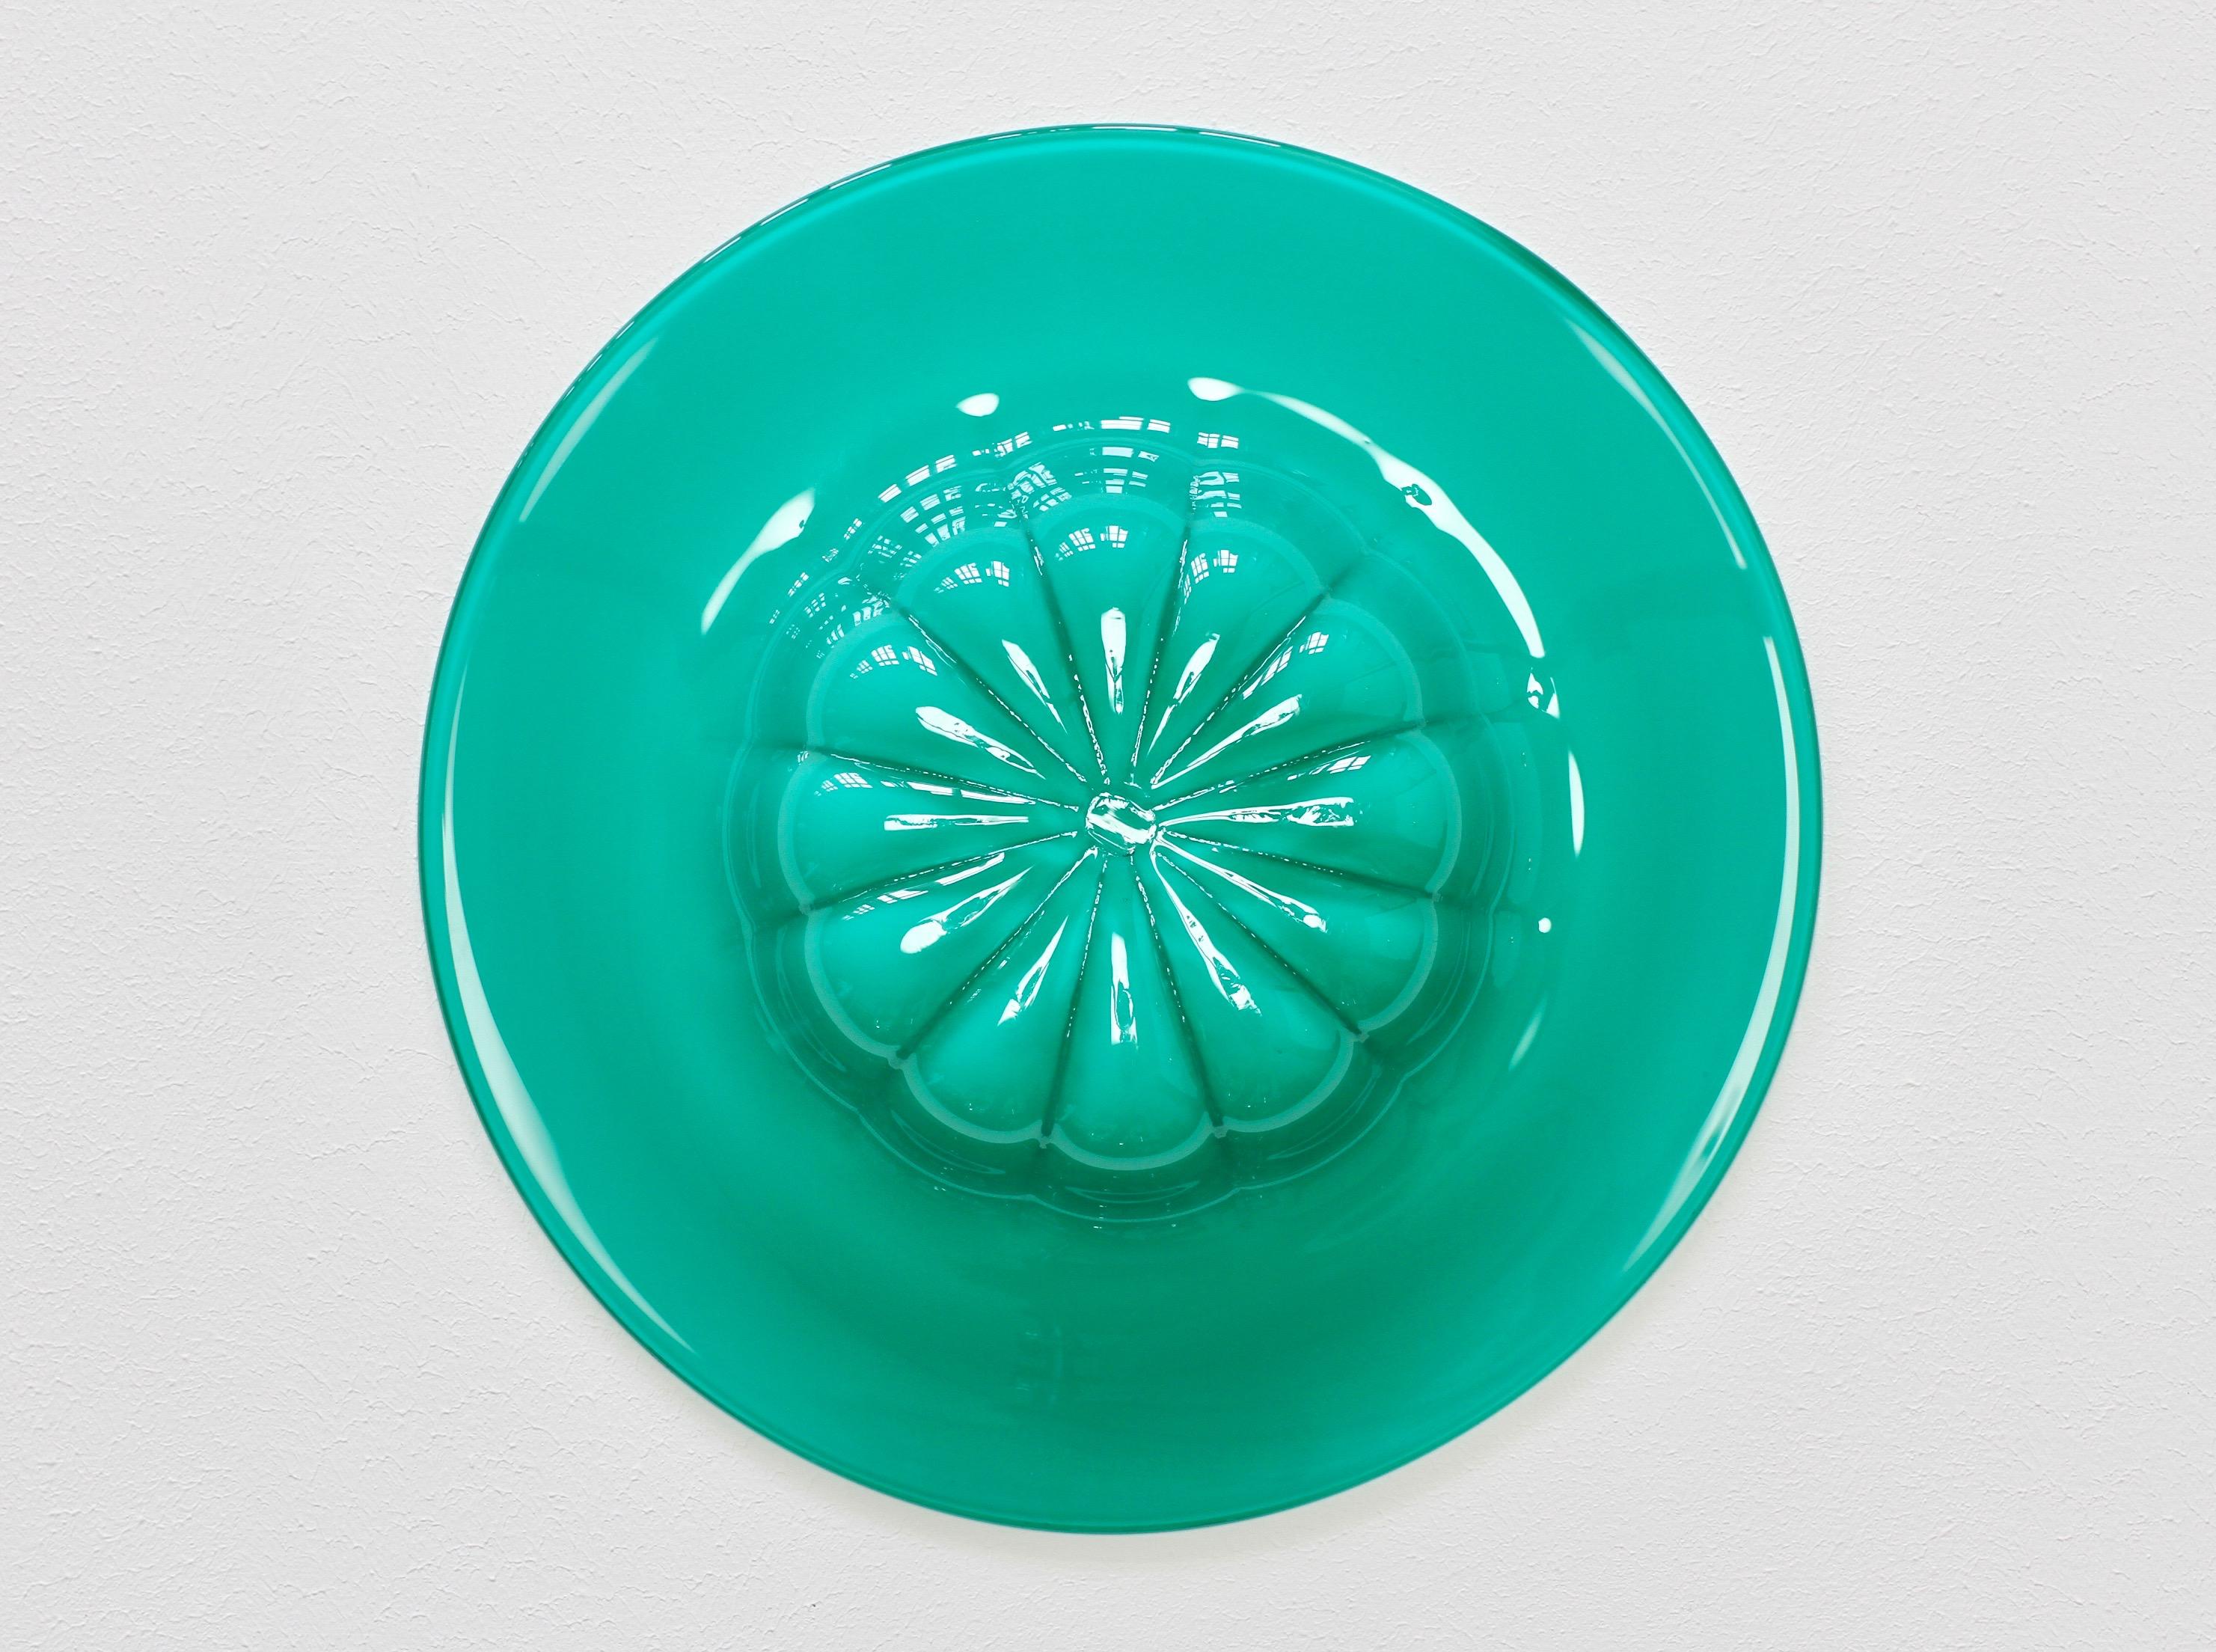 Colorful (colorful) midcentury turquoise green serving bowl or dish attributed to Cenedese Vetri of Murano, Italy, circa 1970s-1990s. Large rim or edge with a rippled base, very similar to Napoleone Martinuzzi bowls for Venini in the 1920s.

A